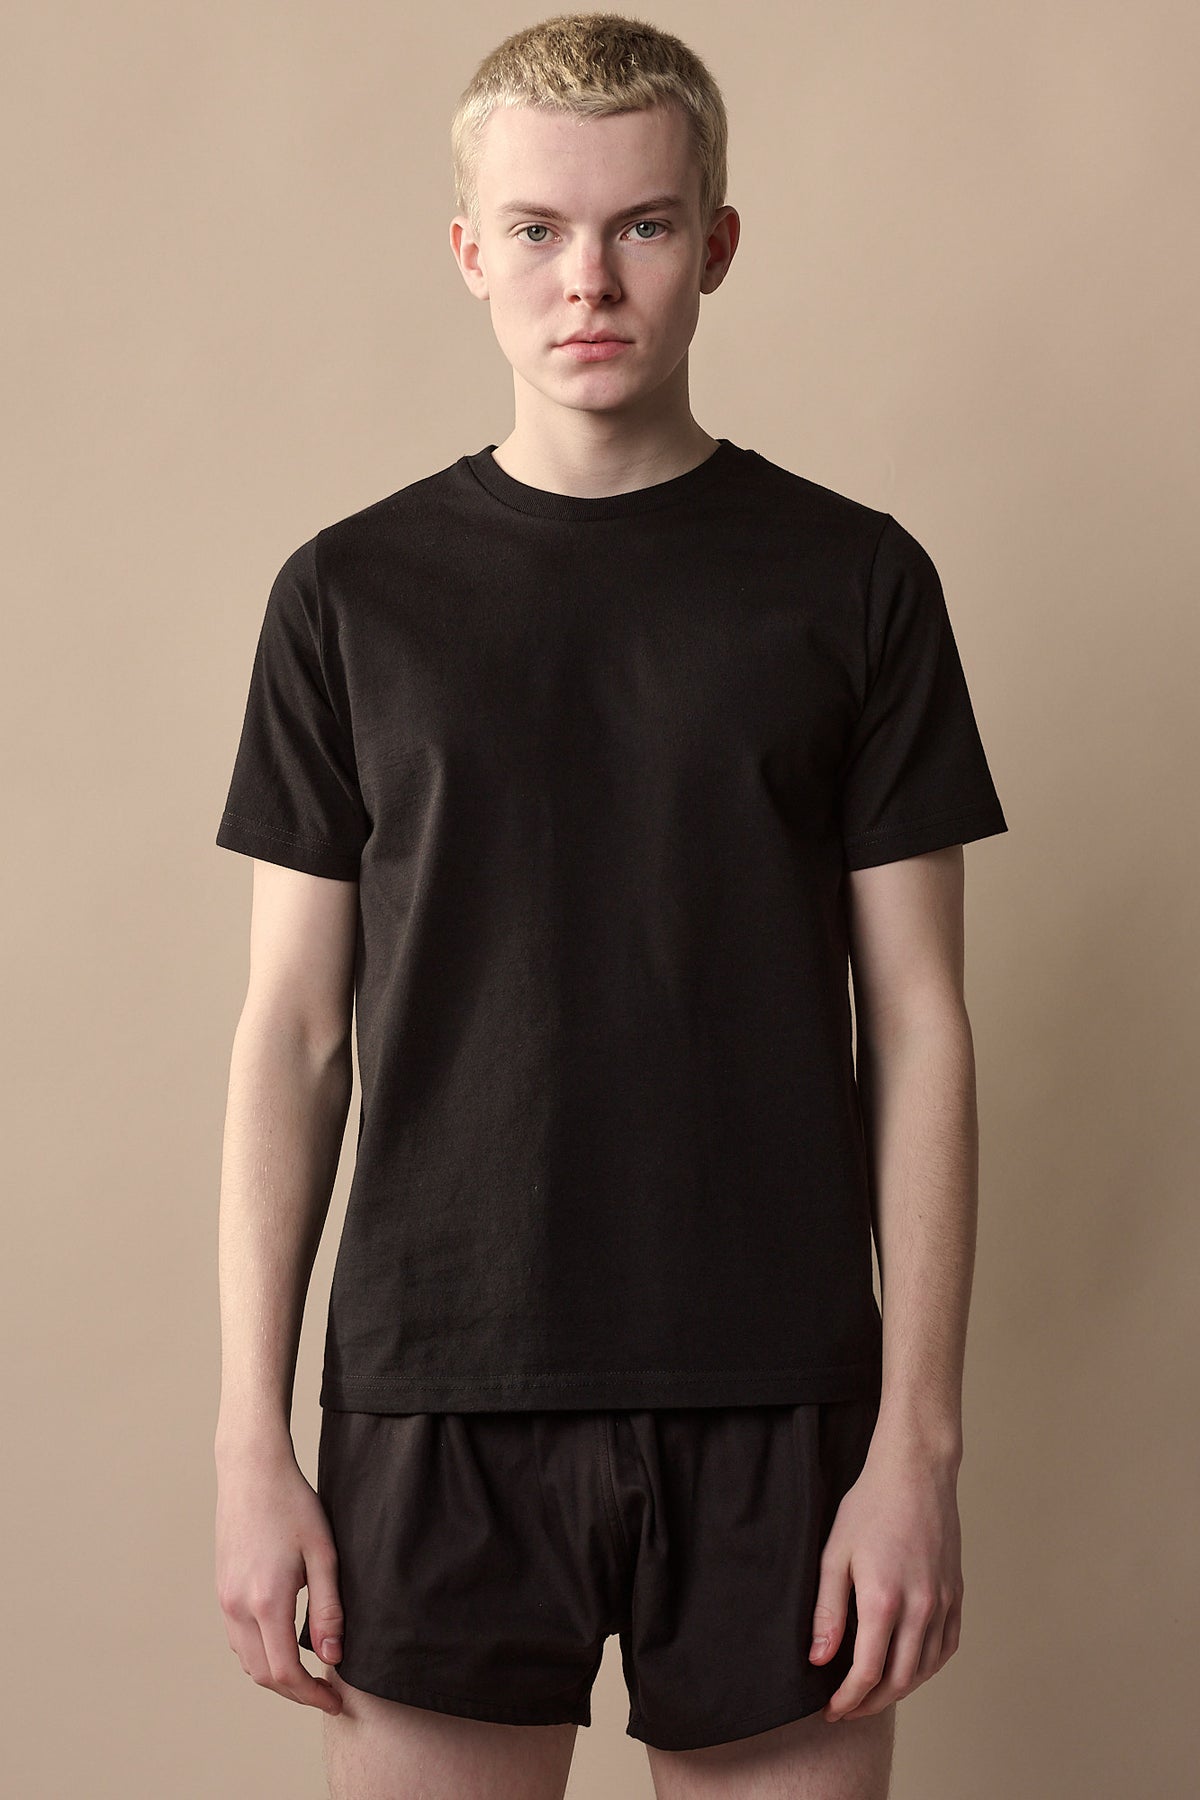 
            Thigh up image of white male wearing short sleeve t shirt plastic free in black 